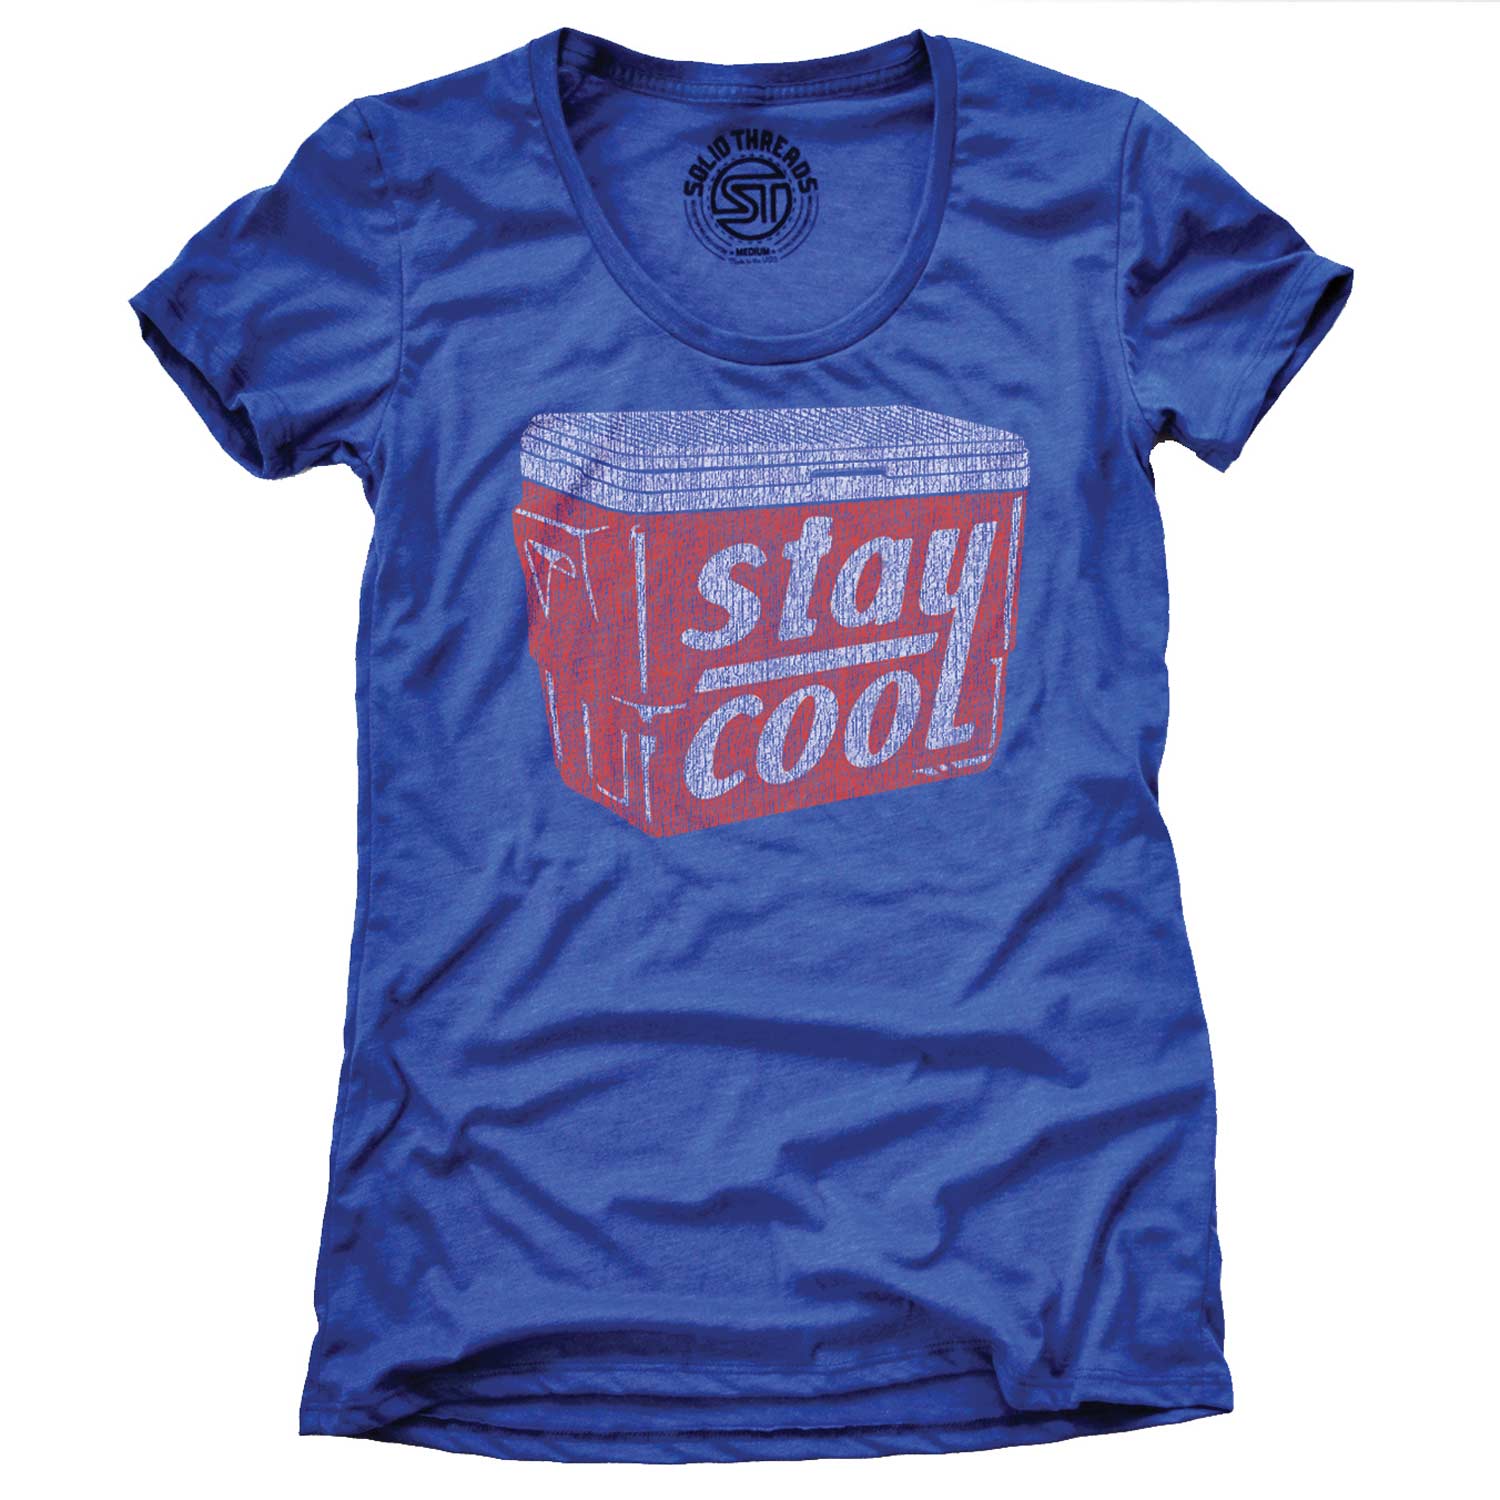 Women's Stay Cool Vintage Graphic Tee | Retro Summer Cooler T-shirt for Women | Solid Threads